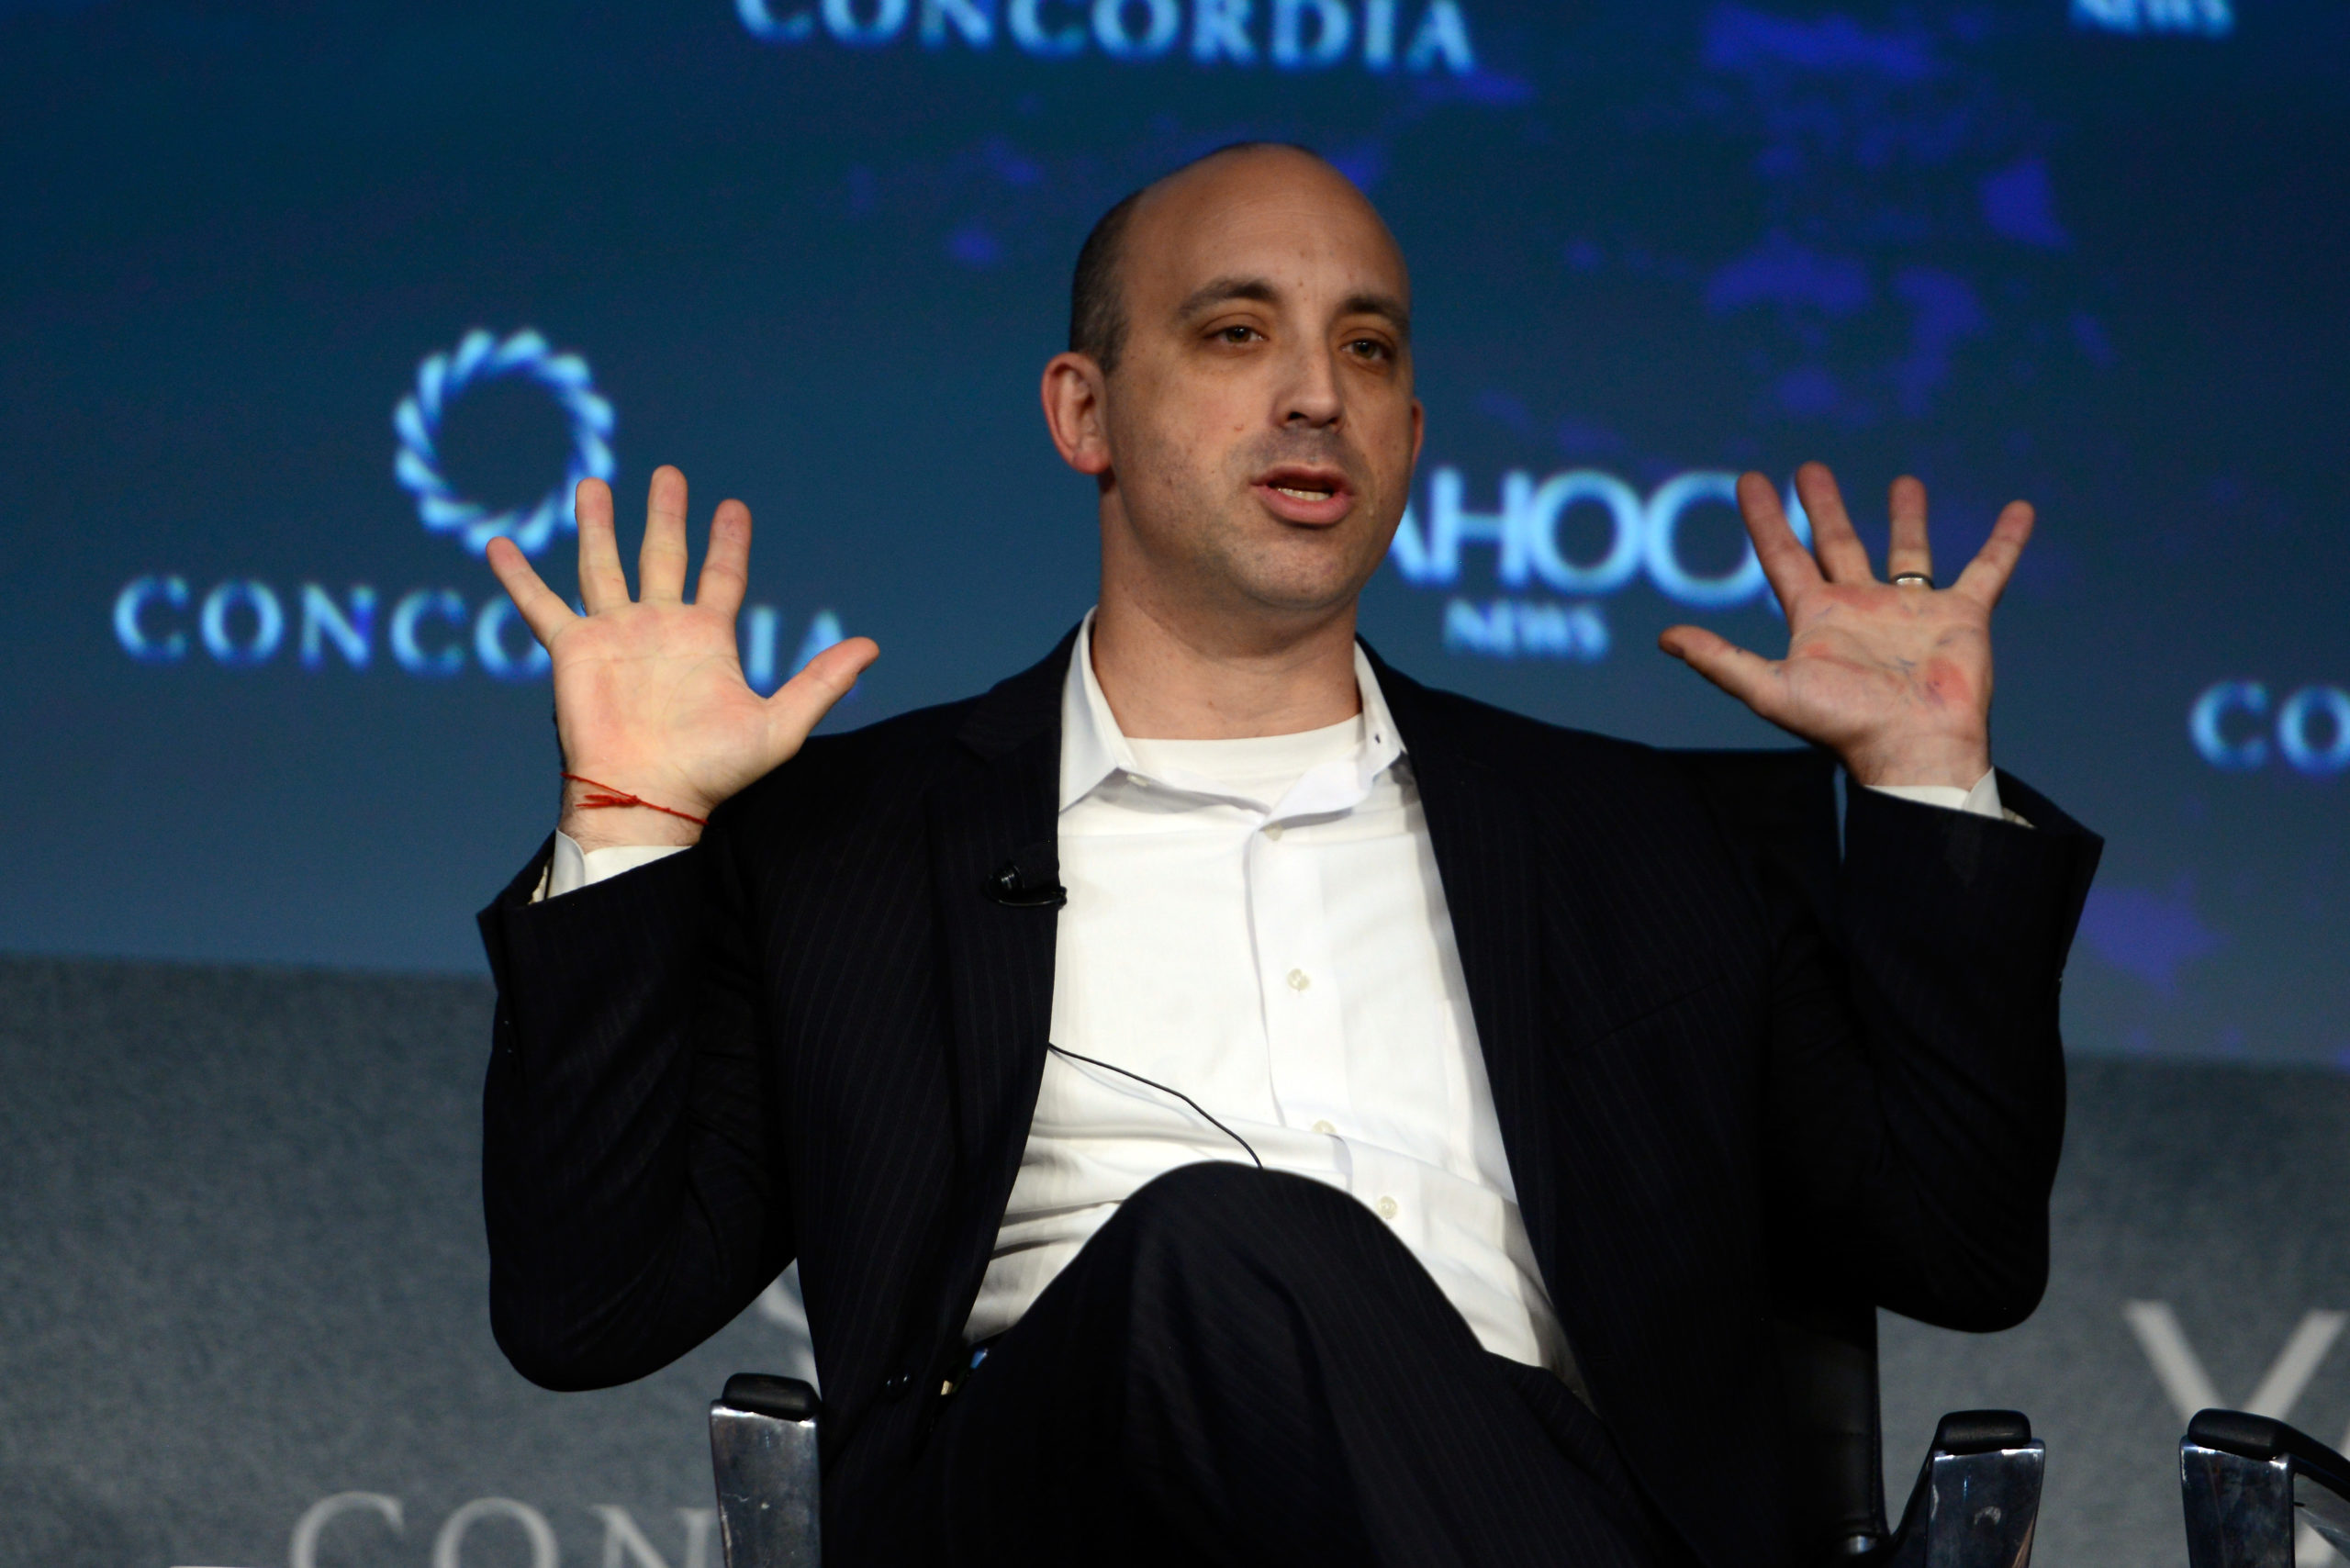 Director of the Anti-Defamation League Jonathan Greenblatt speaks on stage during the 2015 Concordia Summit at Grand Hyatt New York on October 2, 2015 in New York City. (Leigh Vogel/Getty Images for Concordia Summit)